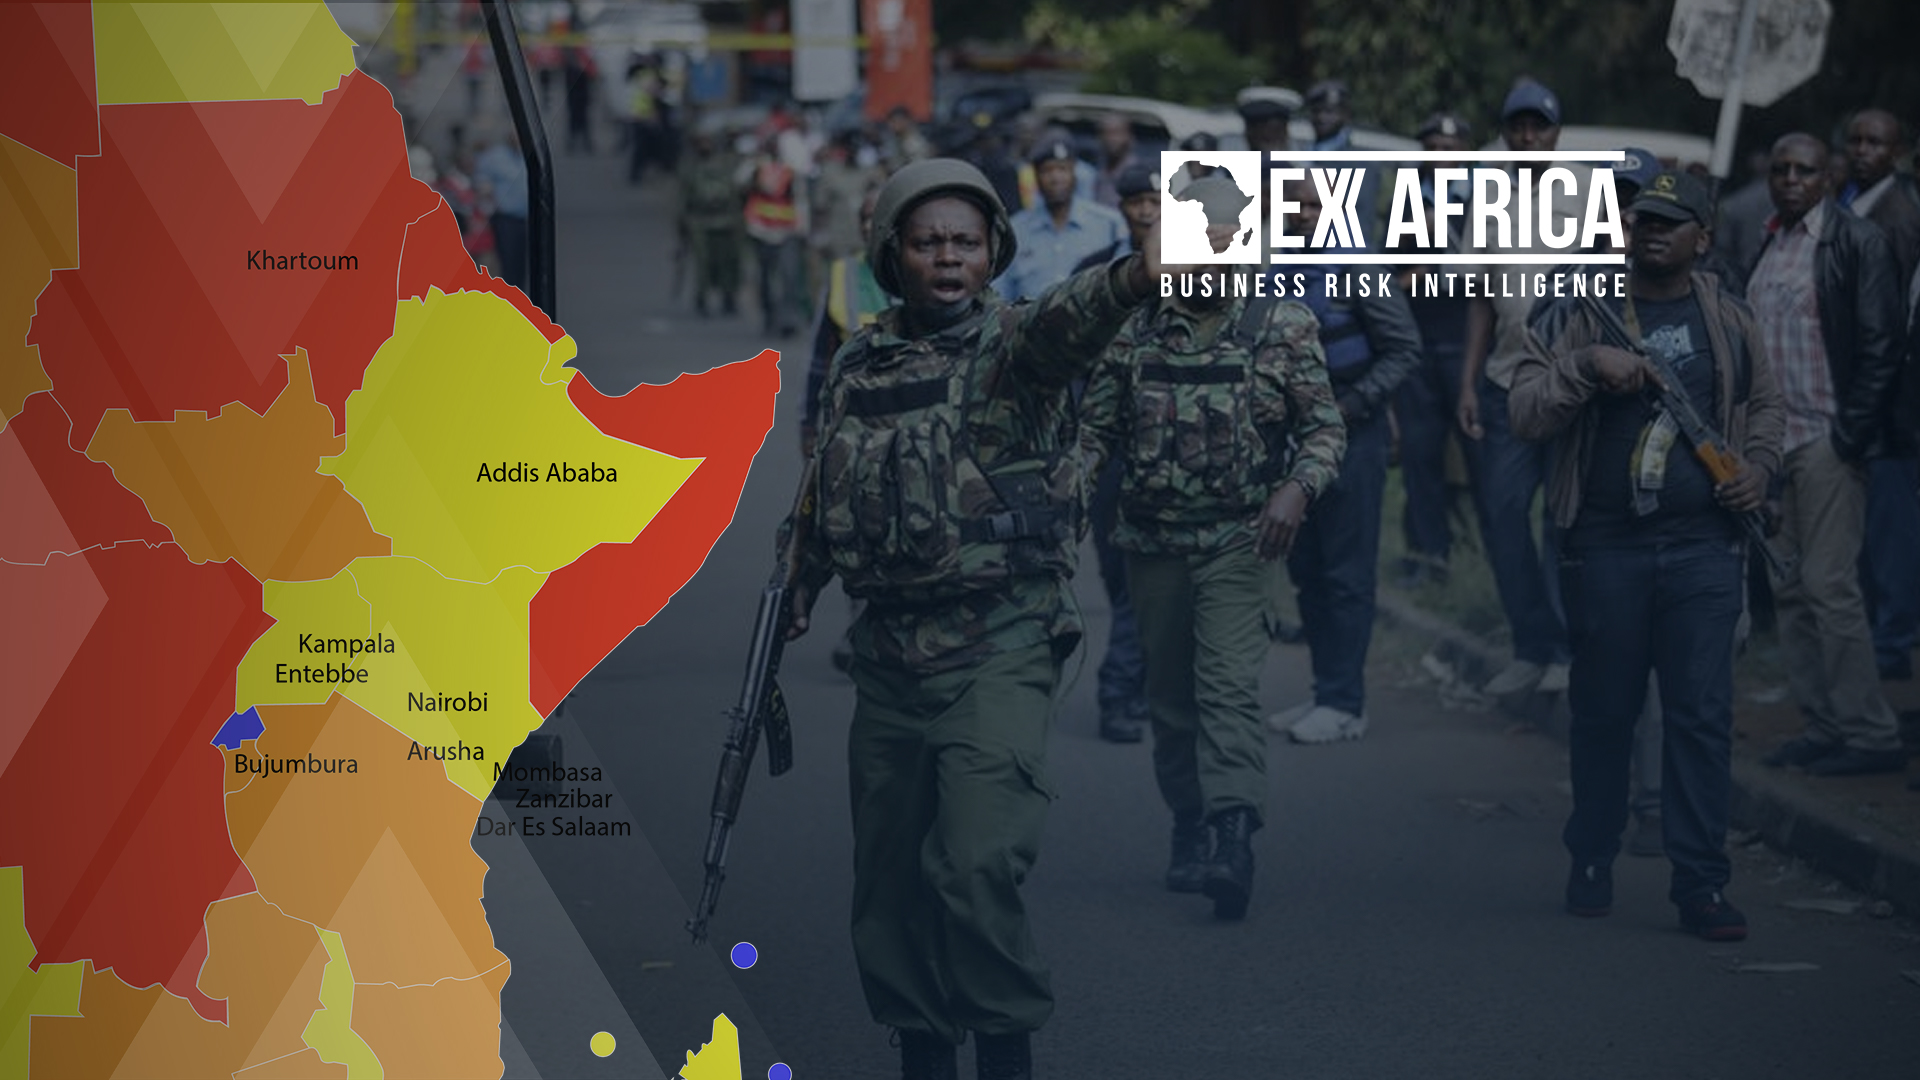 SPECIAL REPORT: TOP TEN EAST AFRICAN CITIES AT RISK OF CRIME AGAINST EXPATS